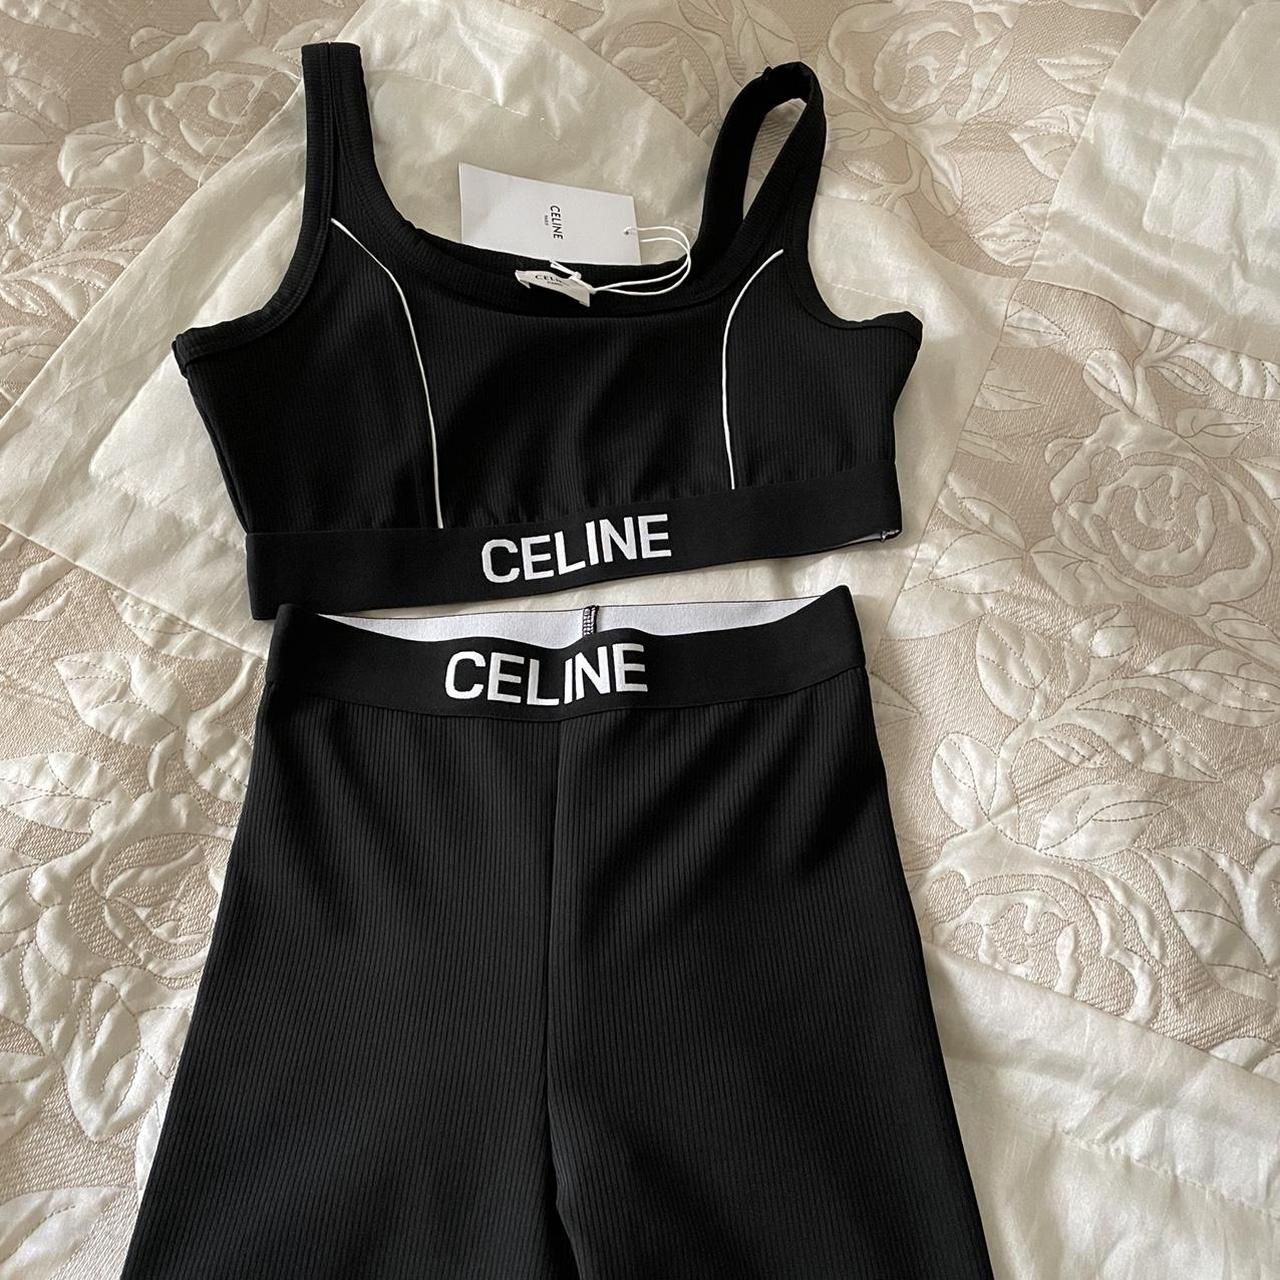 Celine leggings and top. Top small size legging xs - Depop